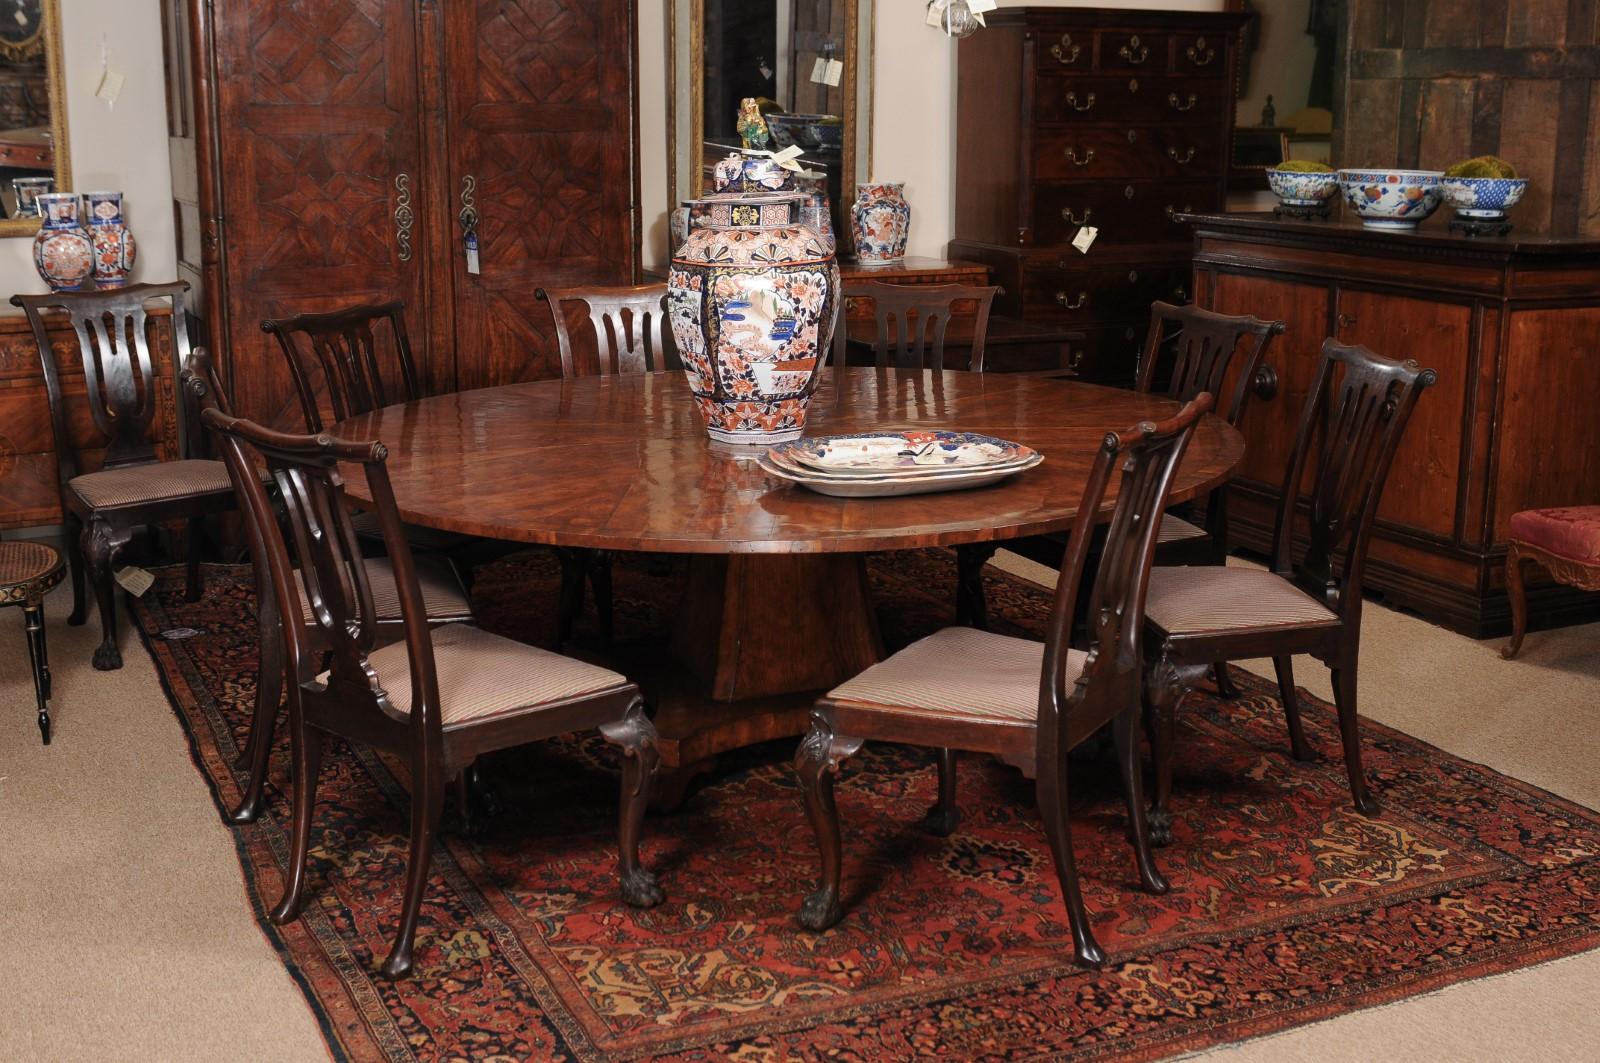 A round yew wood dining table featuring pedestal base and scroll feet. The table is a handmade reproduction possibly from England.